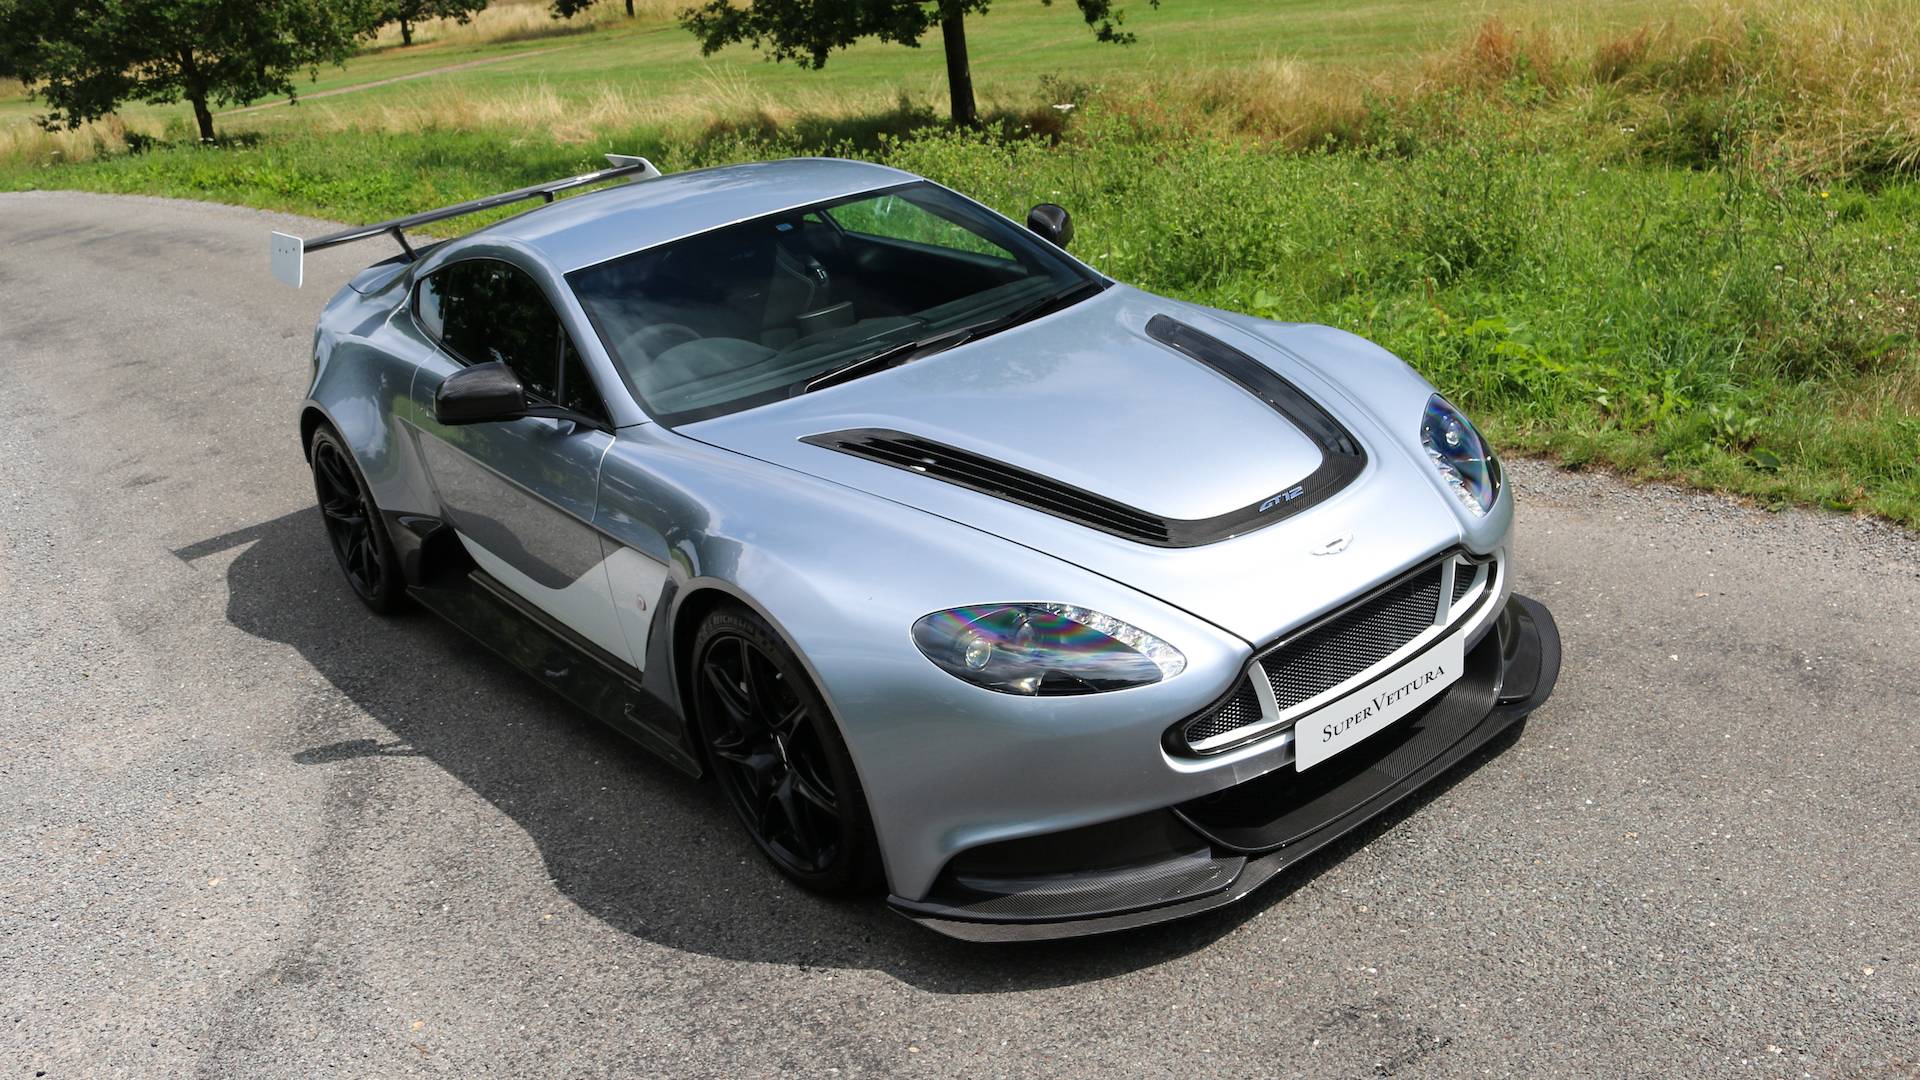 For Sale Aston Martin Vantage Gt12 15 Offered For Gbp 329 950